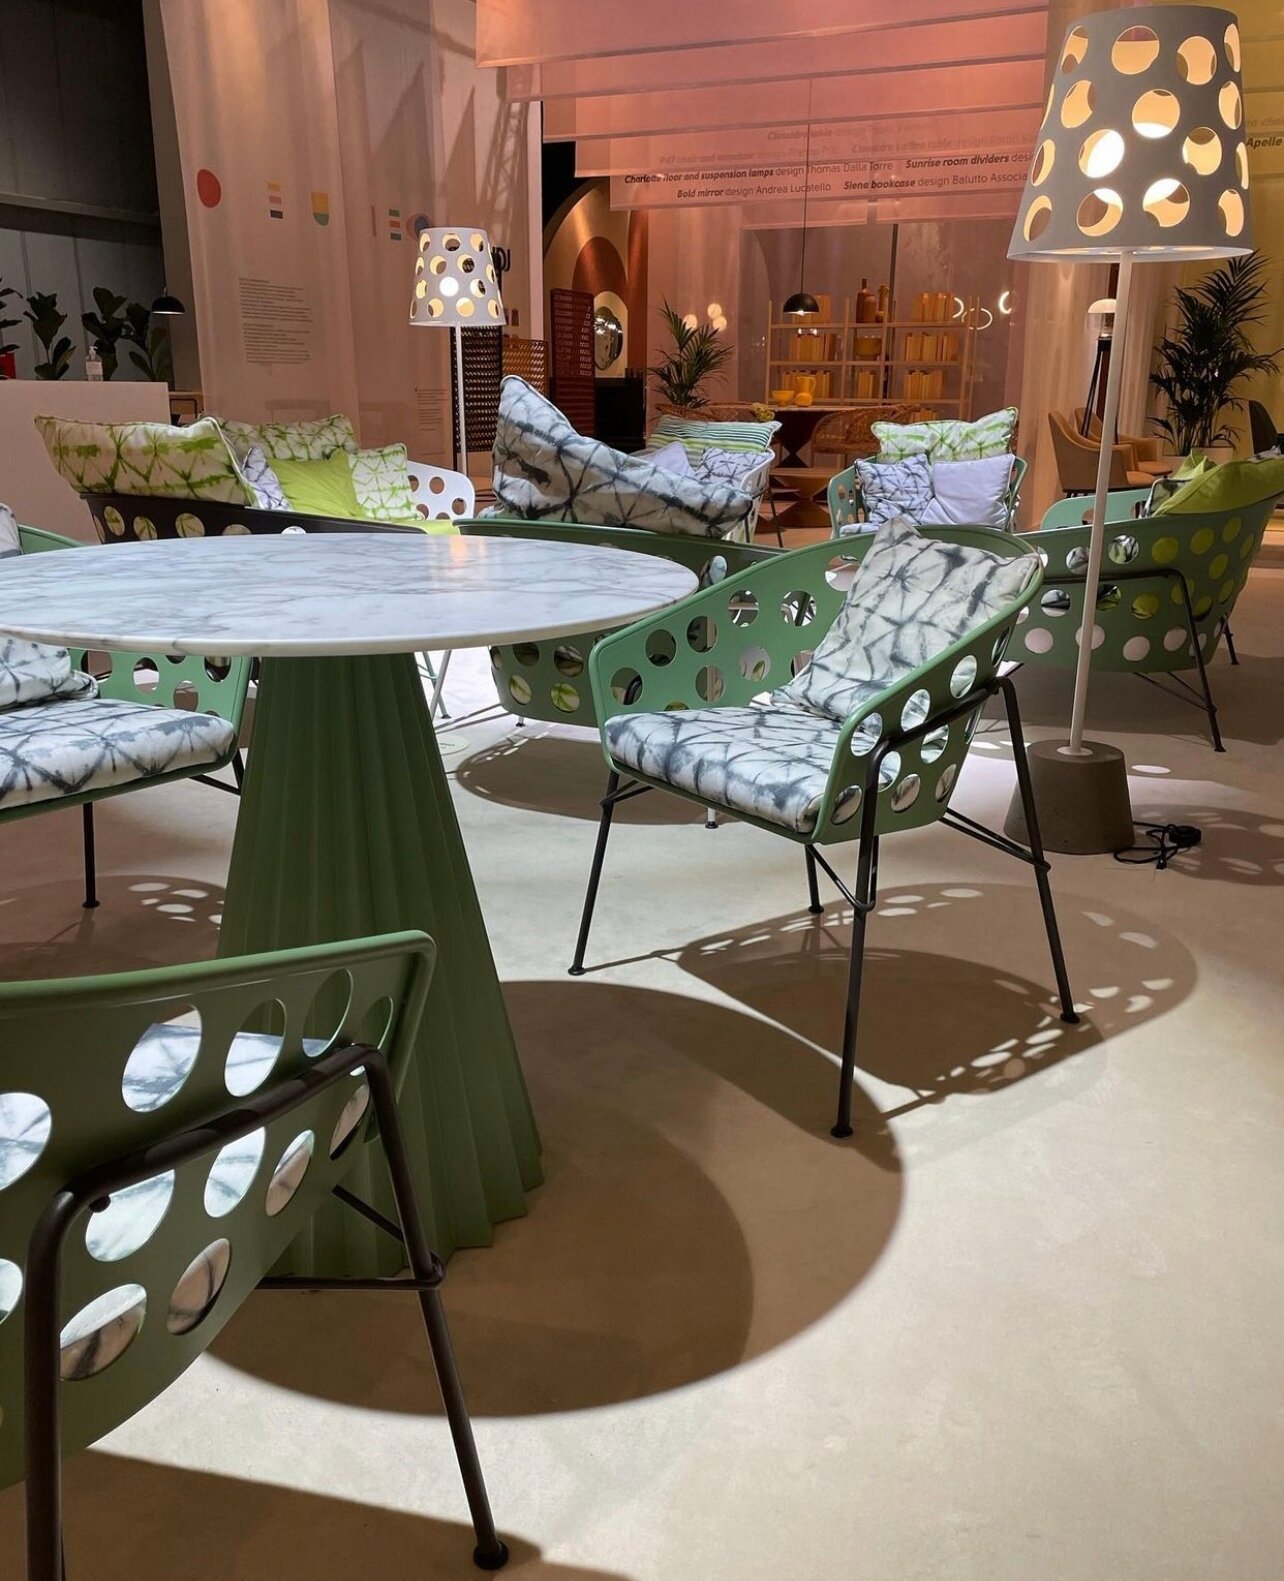 @midjinitaly create bright and joyful products with their amazing design in furniture. Take a seat and stay awhile. 

#denver #colorado #residentaldesign #decor #decorinspo #decorinspiration #furnituredesign #furnituredesigner #showroom #design #desi